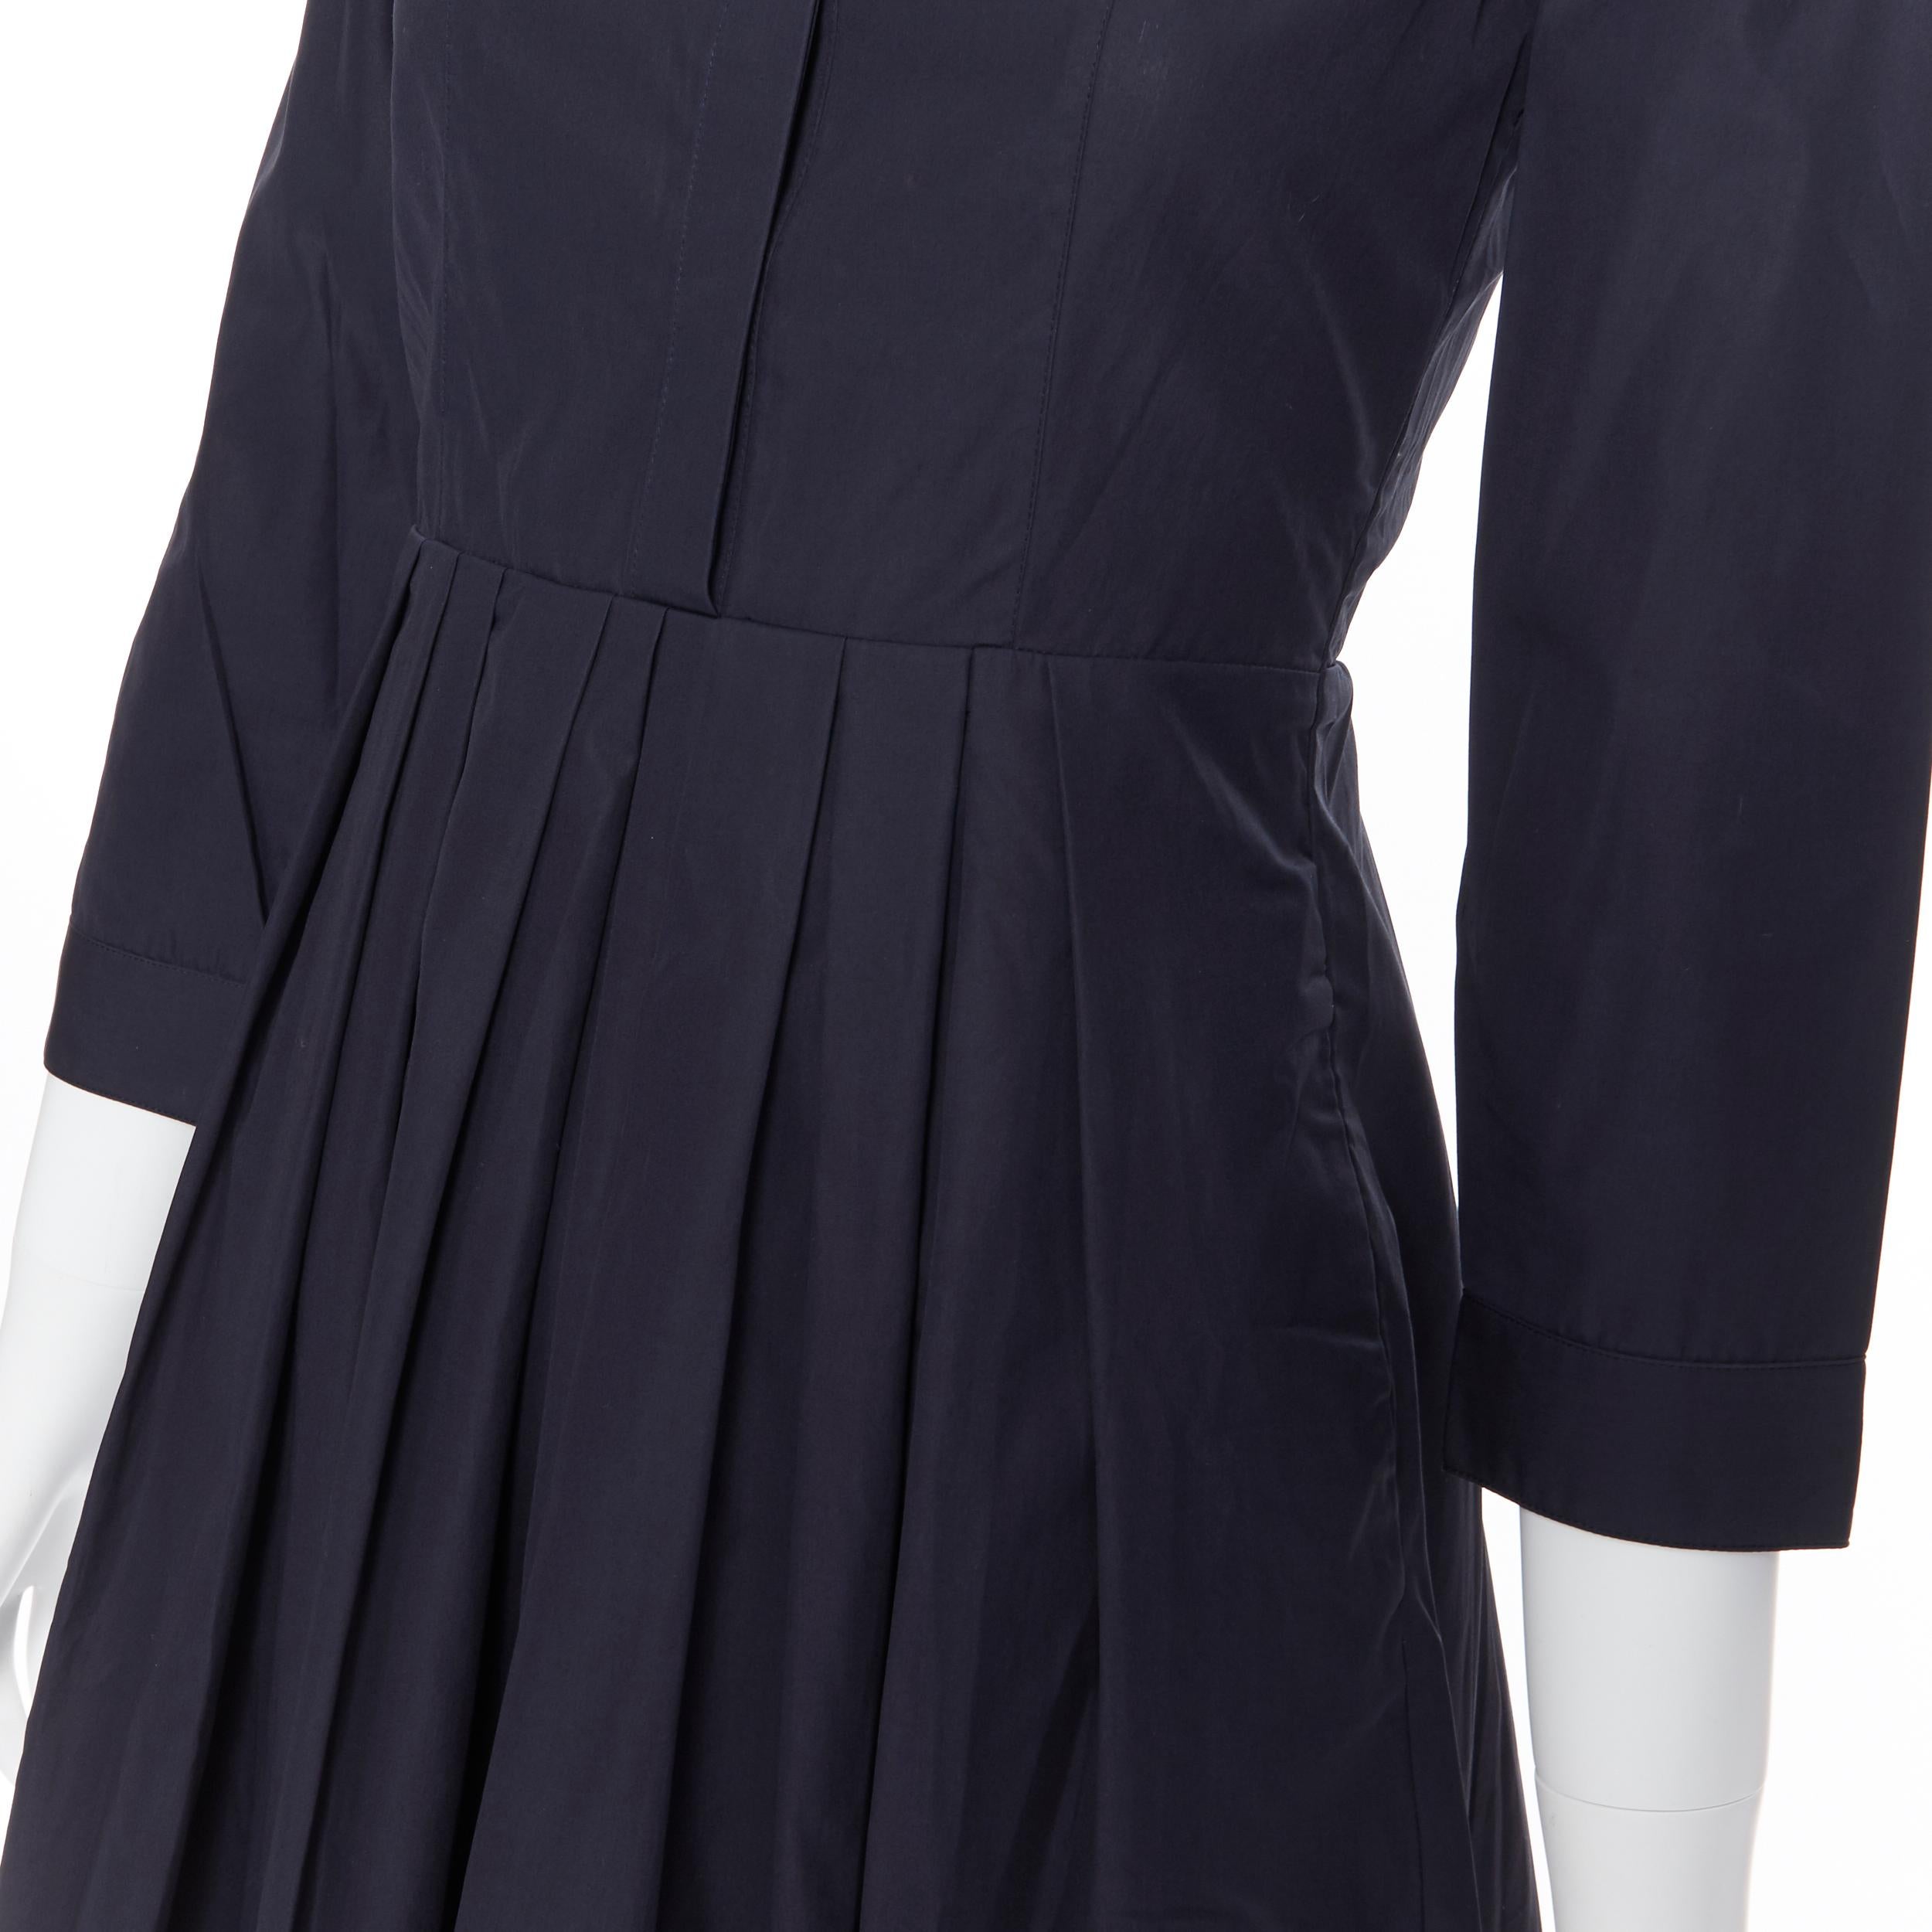 BURBERRY navy blue cotton pleated skirt safari detail casual dress IT36 XS
Brand: Burberry
Model Name / Style: Cotton dress
Material: Cotton
Color: Navy
Pattern: Solid
Closure: Button
Extra Detail: Military inspired shoulder epaulette design.